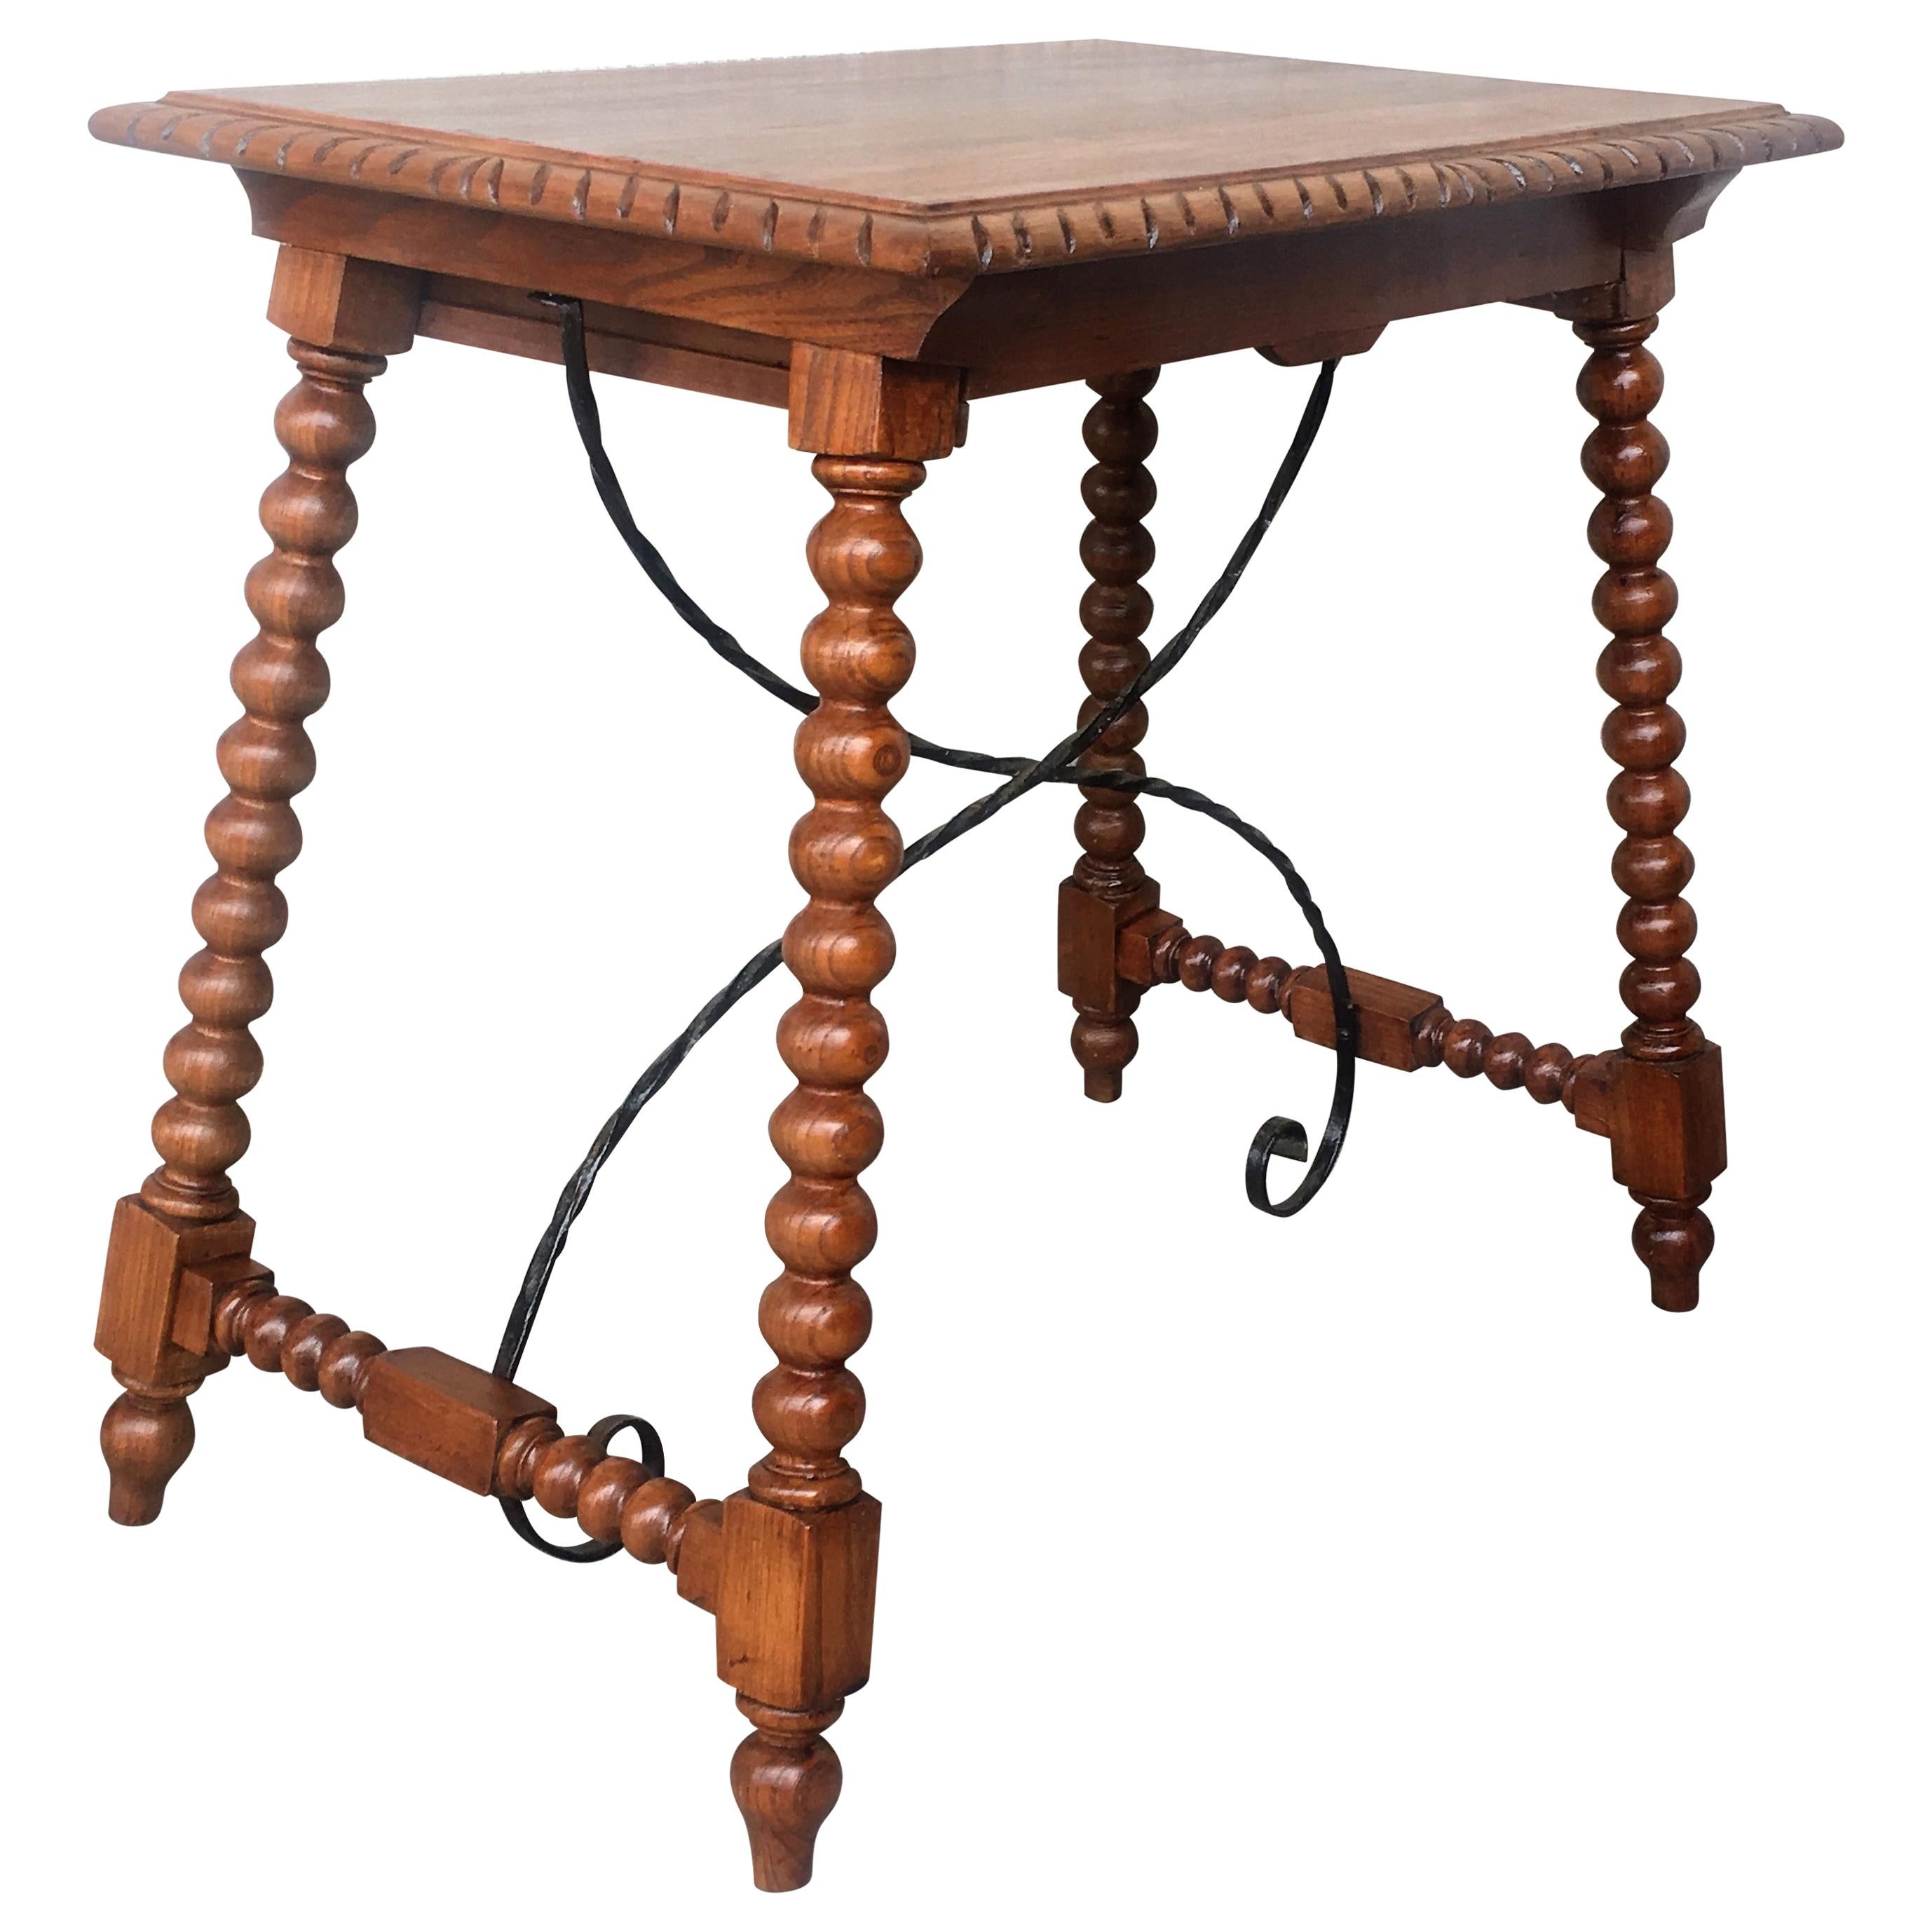 19th Century Spanish Farm Table with Iron Stretchers, Hand Carved Top and Drawer